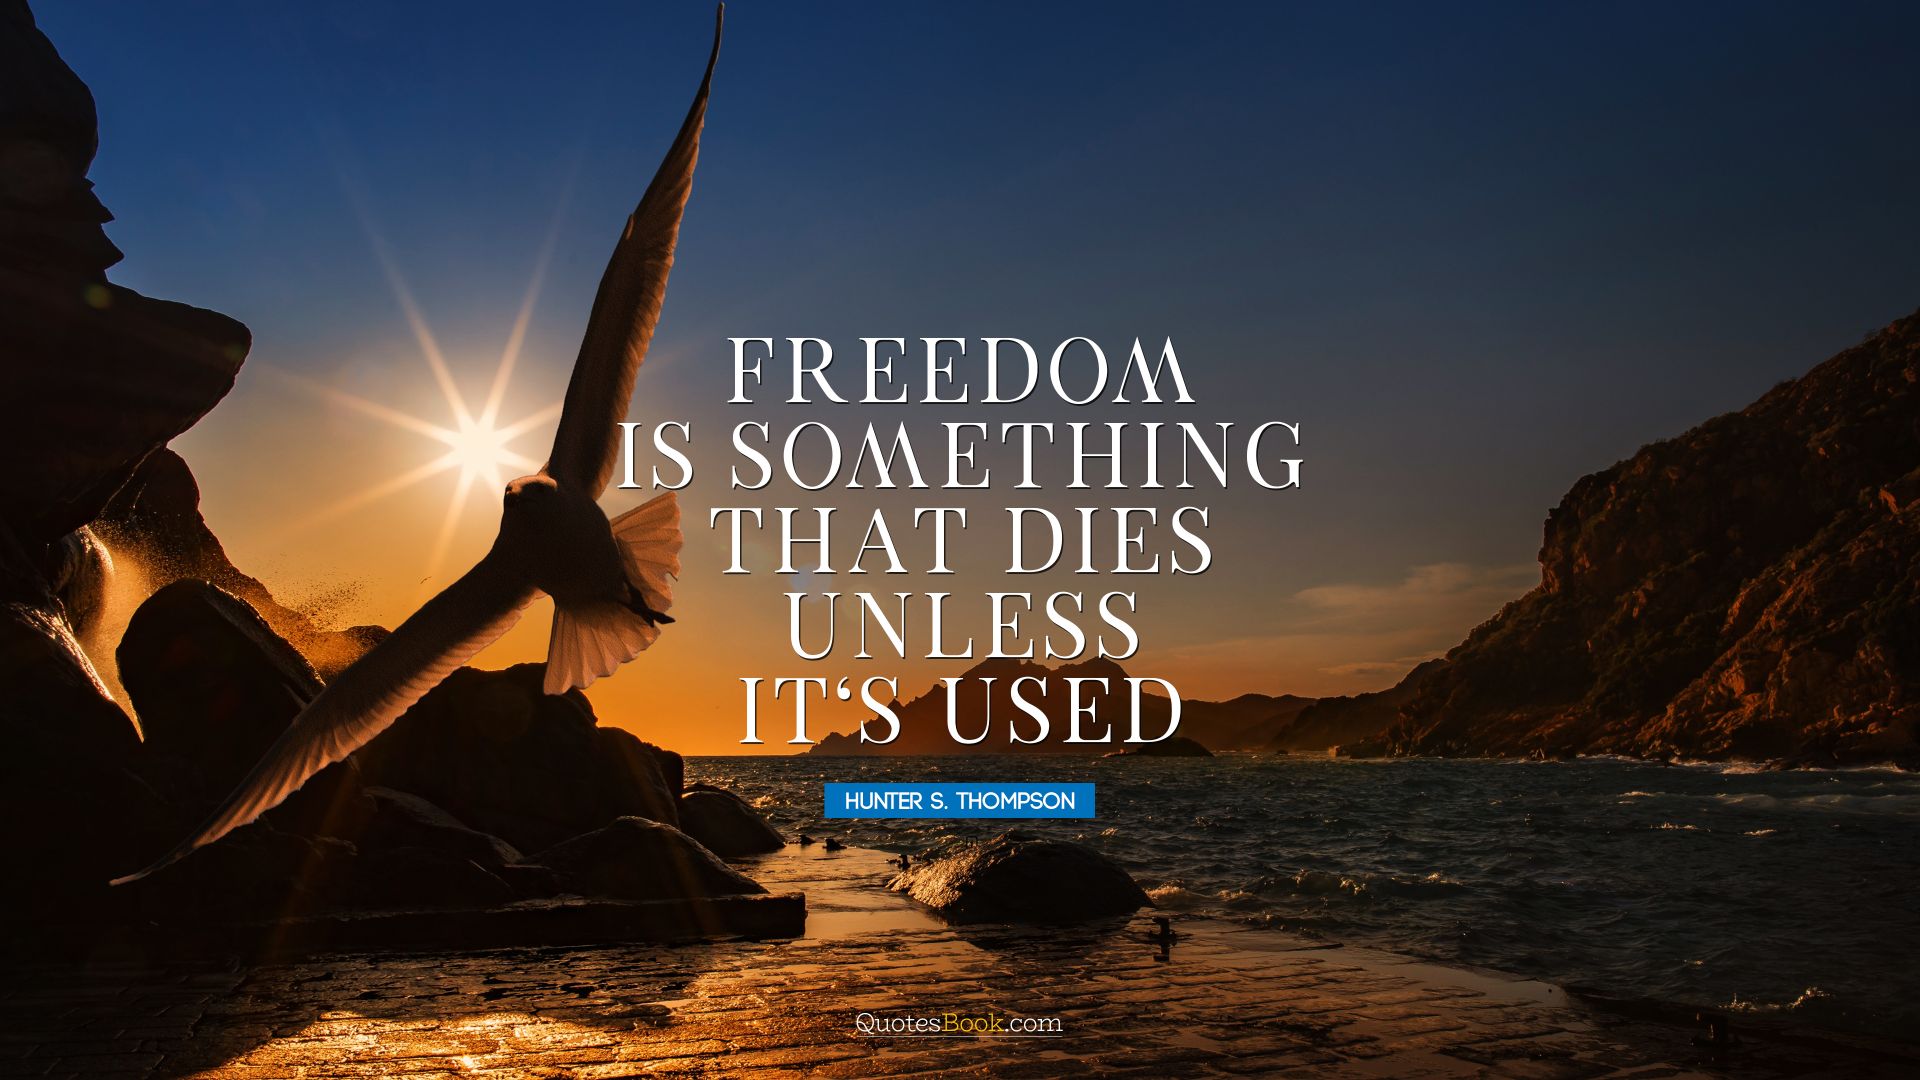 Freedom is something that dies unless it's used. - Quote by Hunter S. Thompson